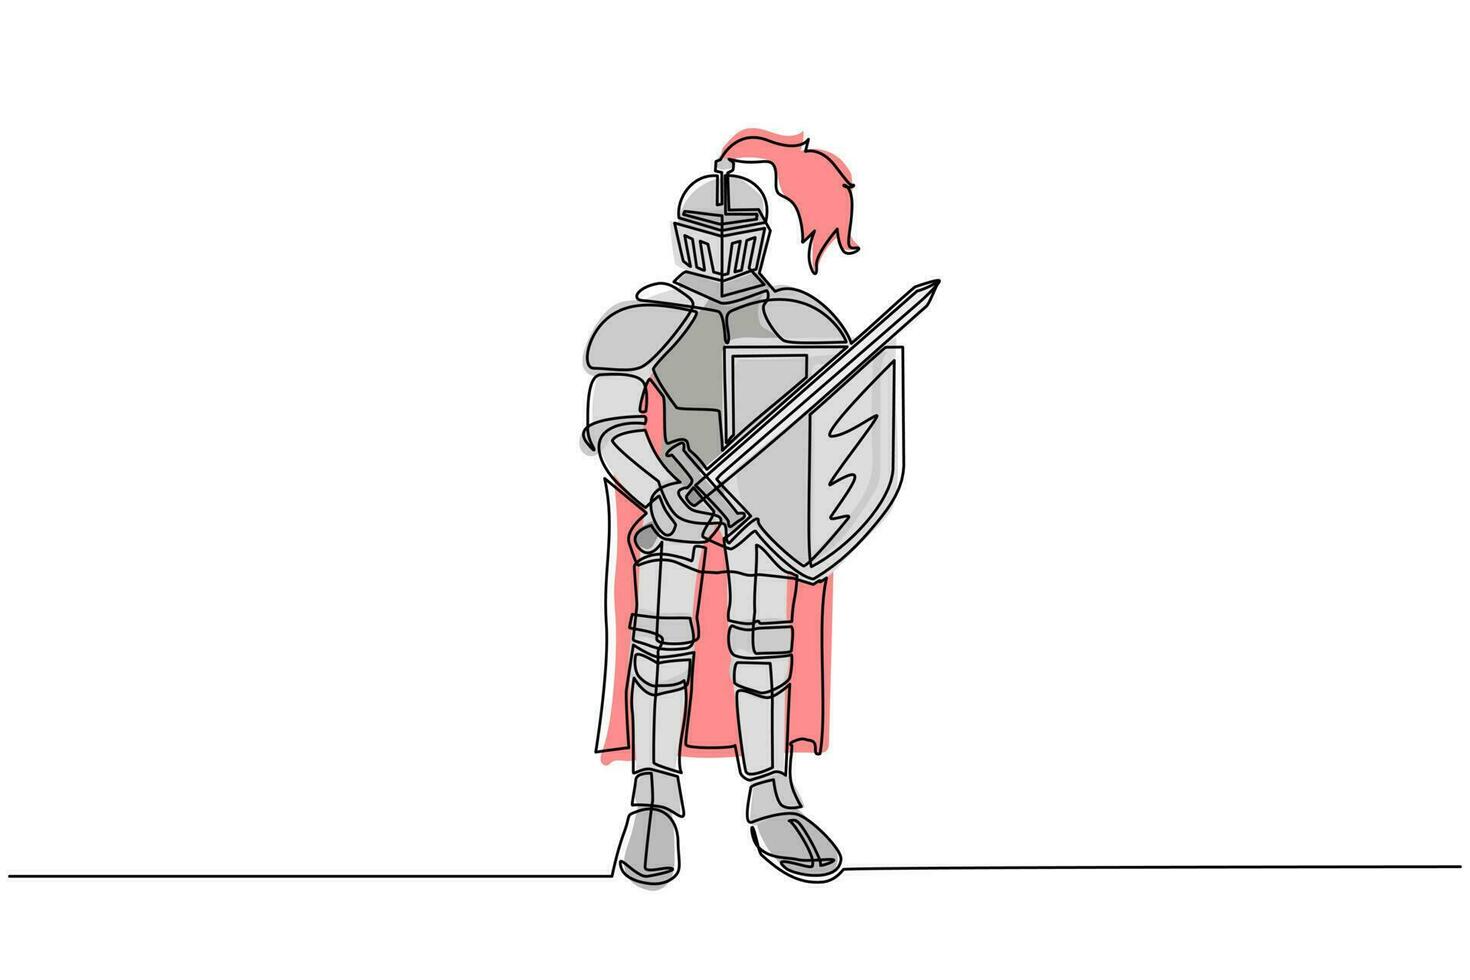 Single continuous line drawing medieval knight in armor, cape, helmet with feather. Warrior of middle ages standing and holding sword and shield. Chivalry figure. One line draw design graphic vector